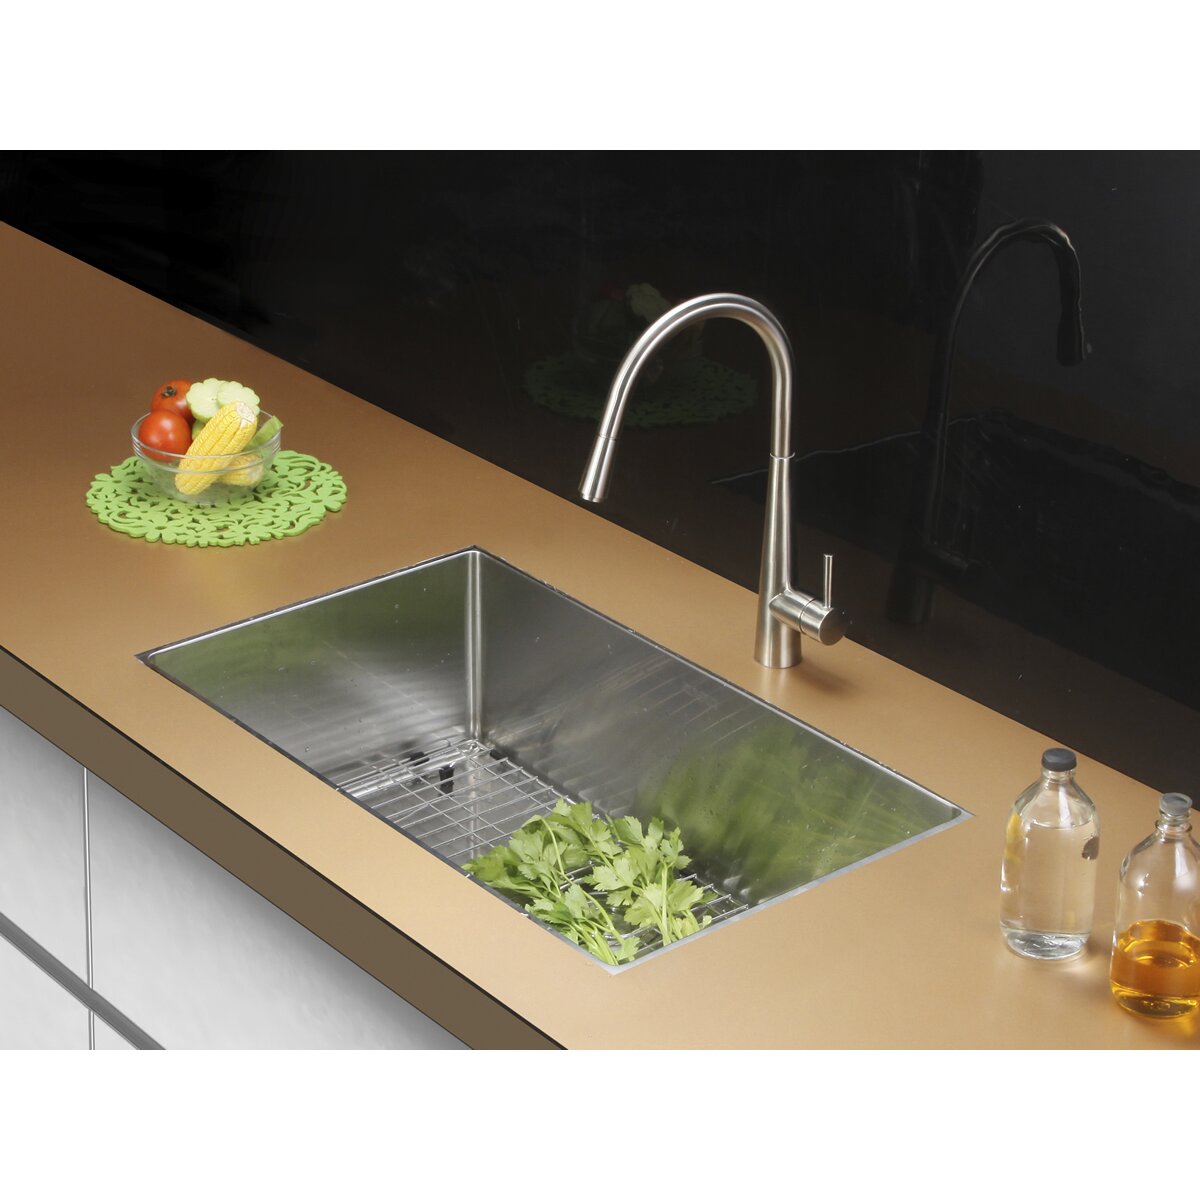 Ruvati 32" x 19" Kitchen Sink with Faucet & Reviews